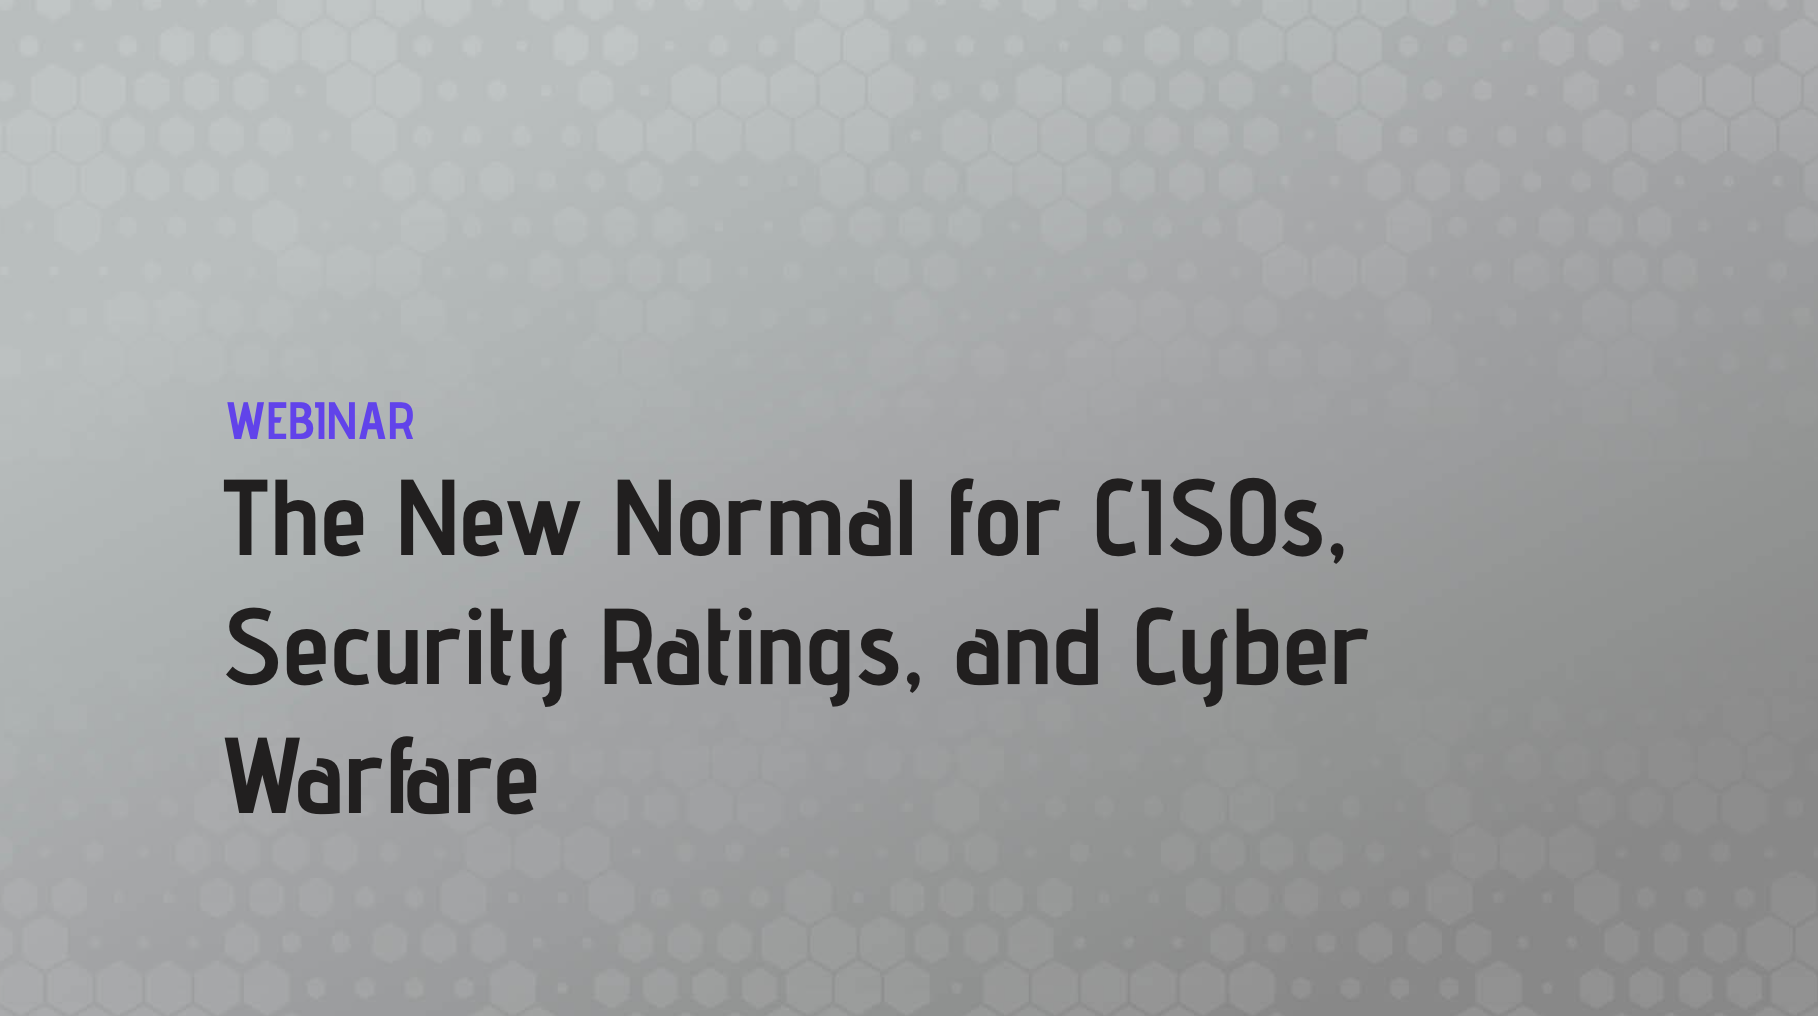 The New Normal for CISOs, Security Ratings, and Cyber Warfare